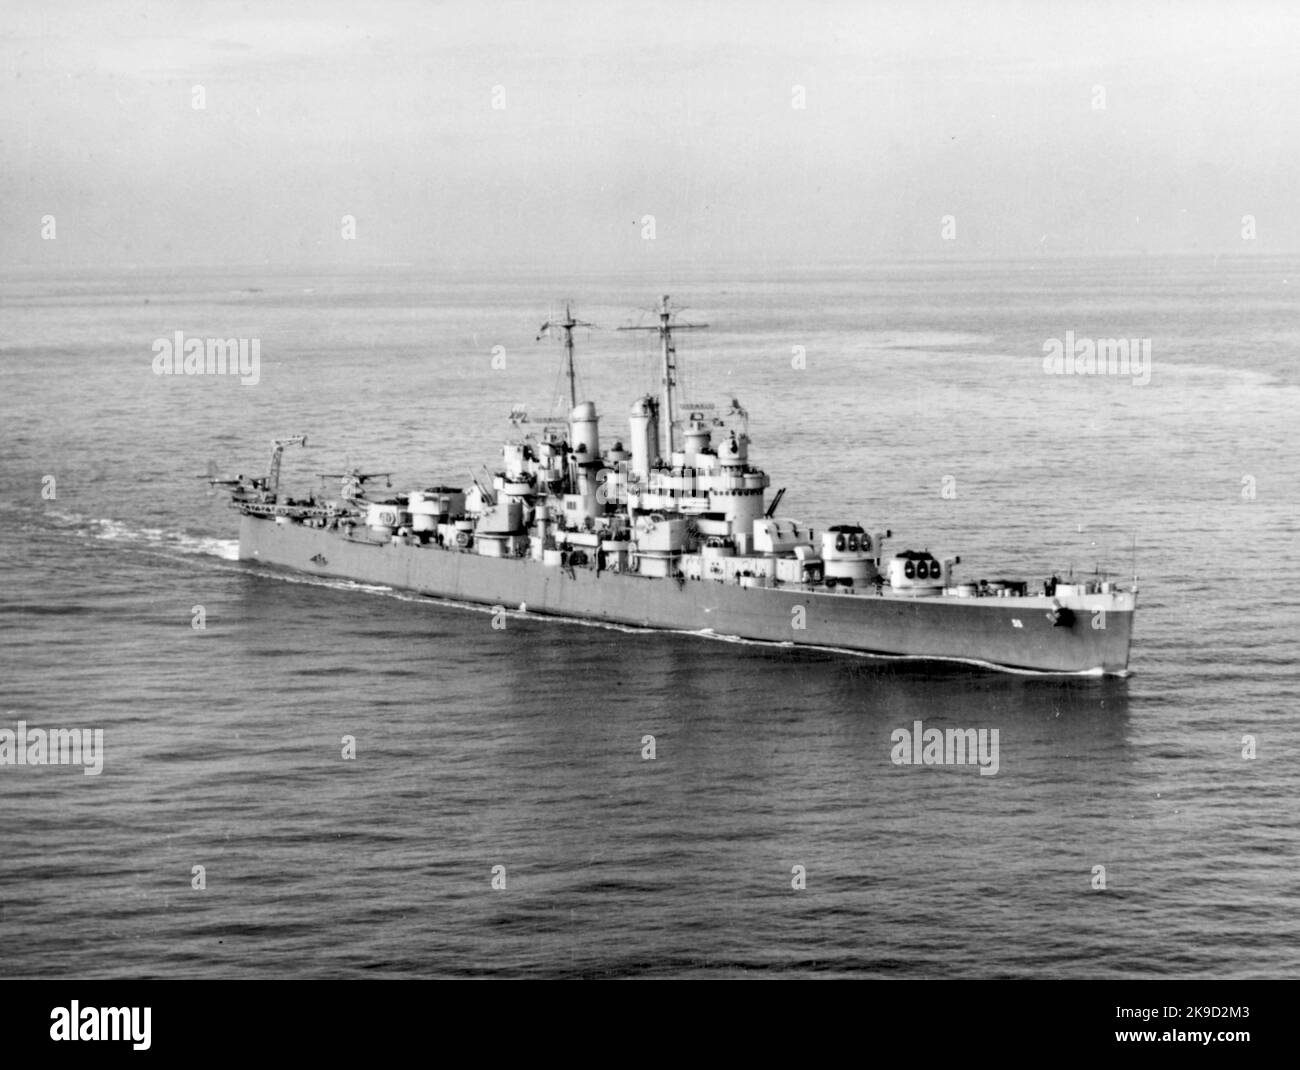 The U.S. Navy light cruiser USS Cleveland (CL-55) underway at sea in late 1942. Note that the ship's forward 152 mm gun turrets and gun director appear to be tracking the photo aircraft. USS Cleveland (CL-55) was the lead ship and one of the 27 United States Navy Cleveland-class light cruisers completed during or shortly after World War II. She was the second ship to be named for the city of Cleveland, Ohio. Stock Photo